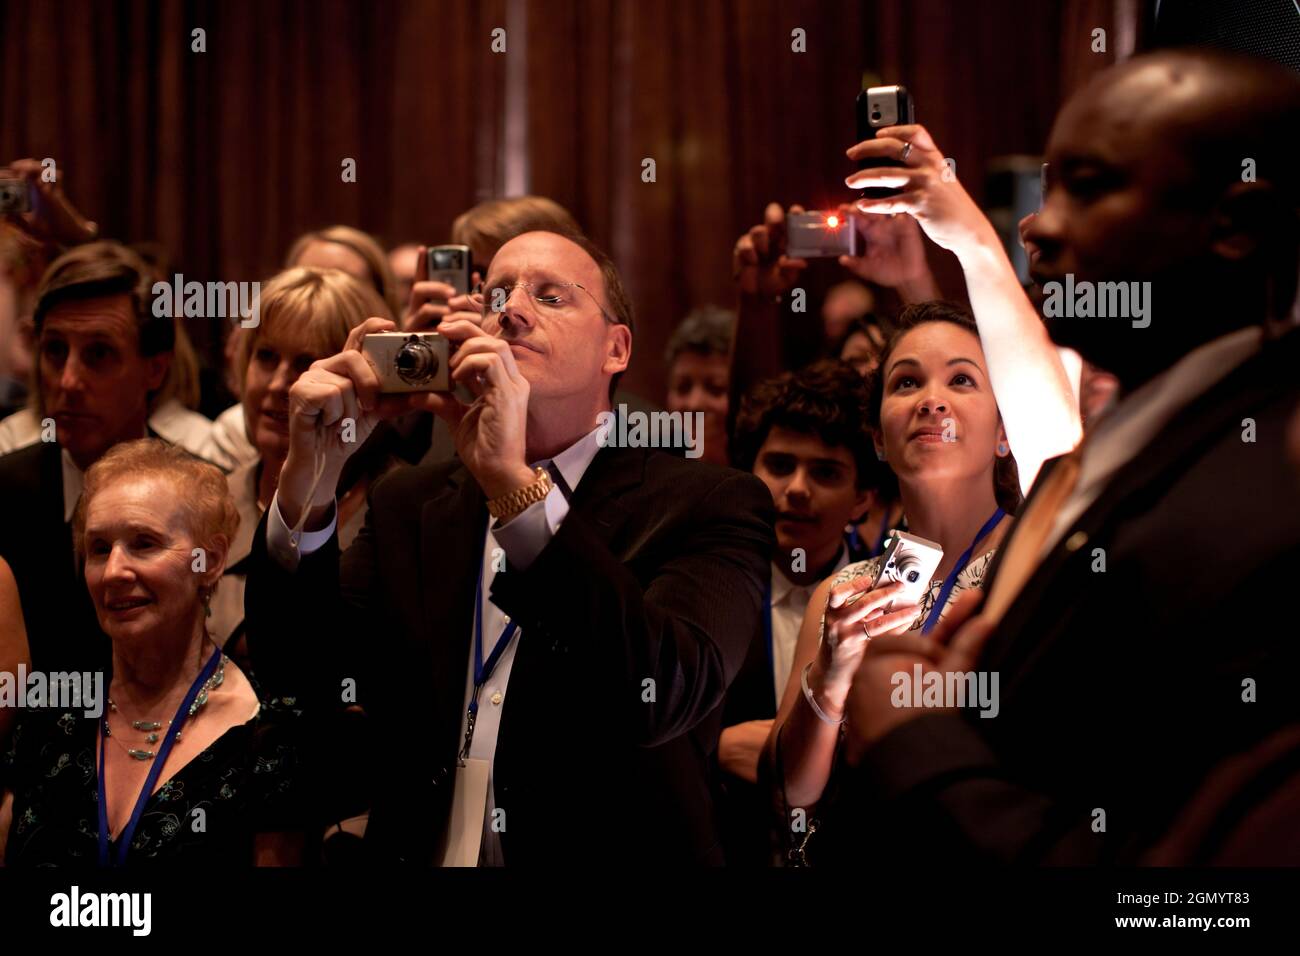 Onlookers seize the opportunity to take photographs of President Barack Obama in Las Vegas during a fundraiser for Sen. Harry Reid at Caesar's Palace, May 26, 2009. (Official White House photo by Pete Souza) This official White House photograph is being made available for publication by news organizations and/or for personal use printing by the subject(s) of the photograph. The photograph may not be manipulated in any way or used in materials, advertisements, products, or promotions that in any way suggest approval or endorsement of the President, the First Family, or the White House. Stock Photo